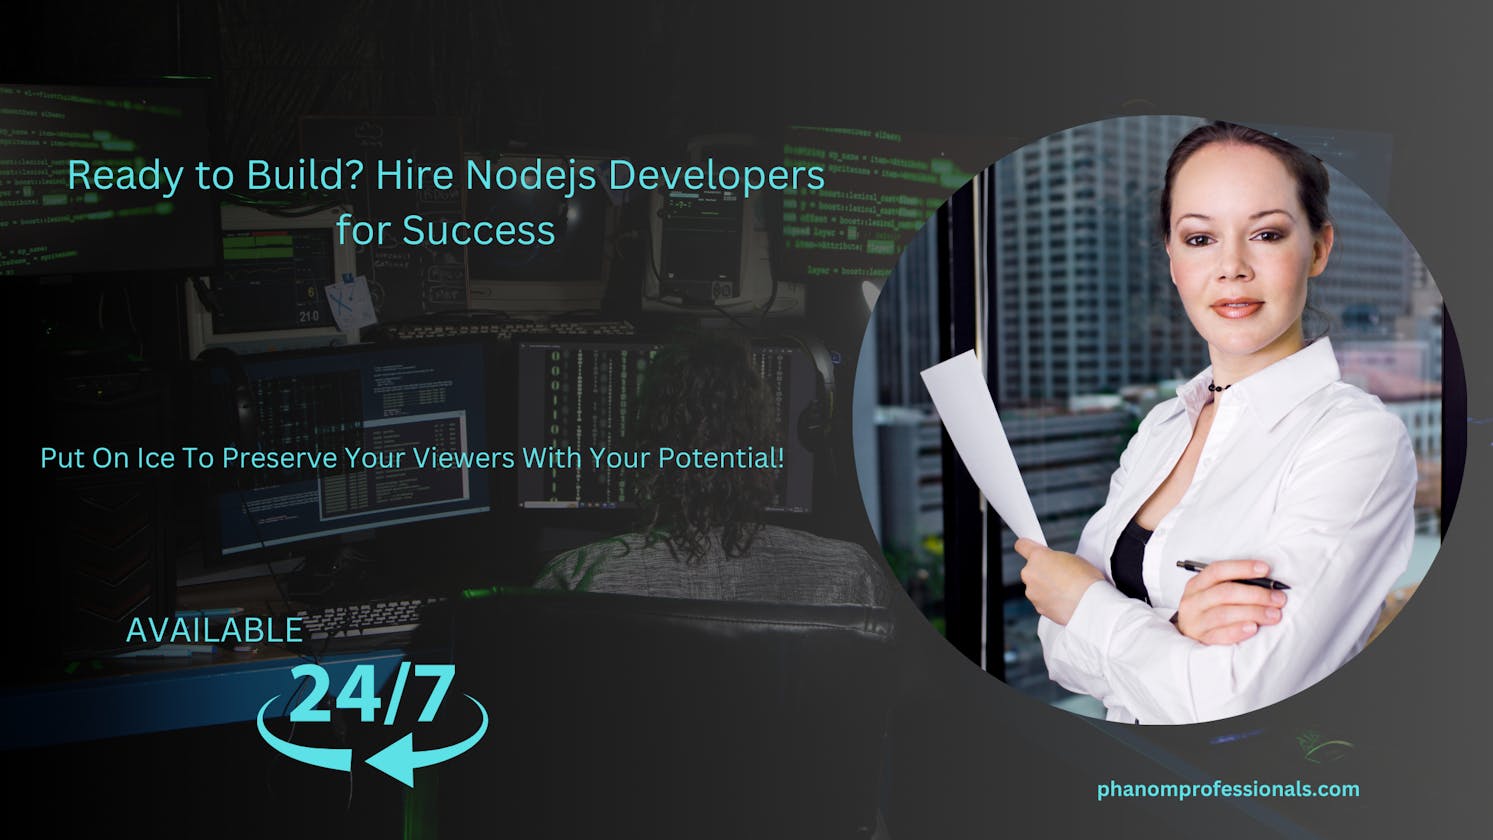 Ready to Build? Hire Nodejs Developers for Success